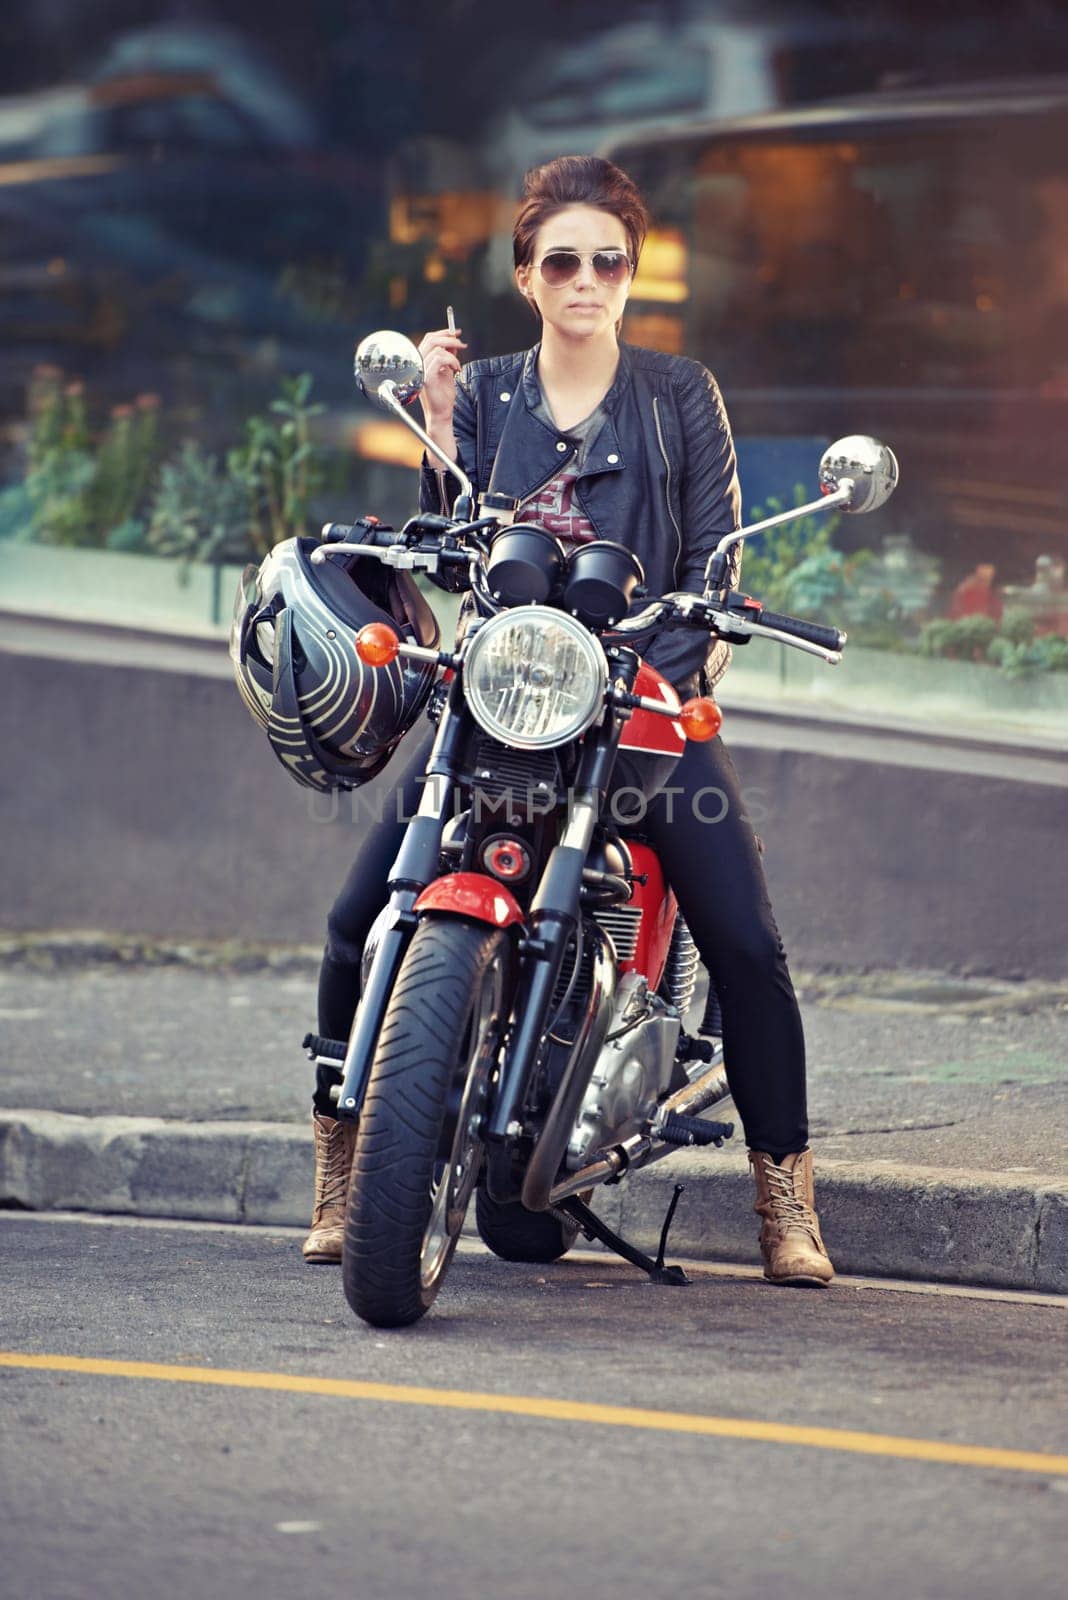 Motorcycle, leather and woman in city with cigarette for travel, transport or road trip as rebel. Fashion, street and smoke with model on classic or vintage bike for transportation or journey.